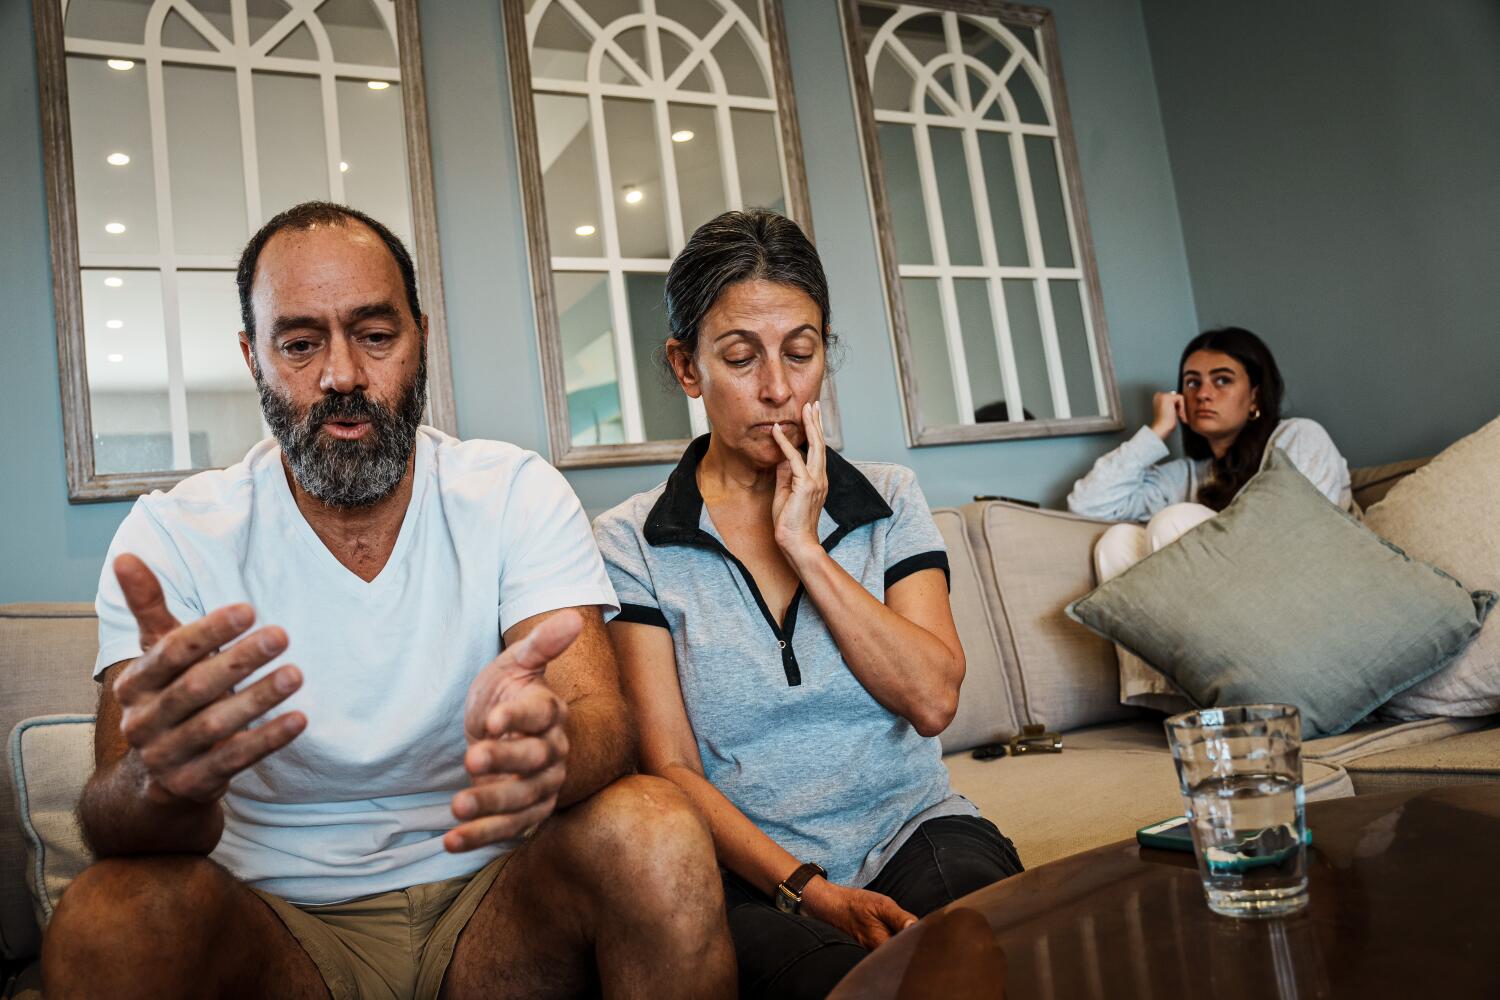 This Israeli couple's son is in enemy hands. They're determined to get him back 